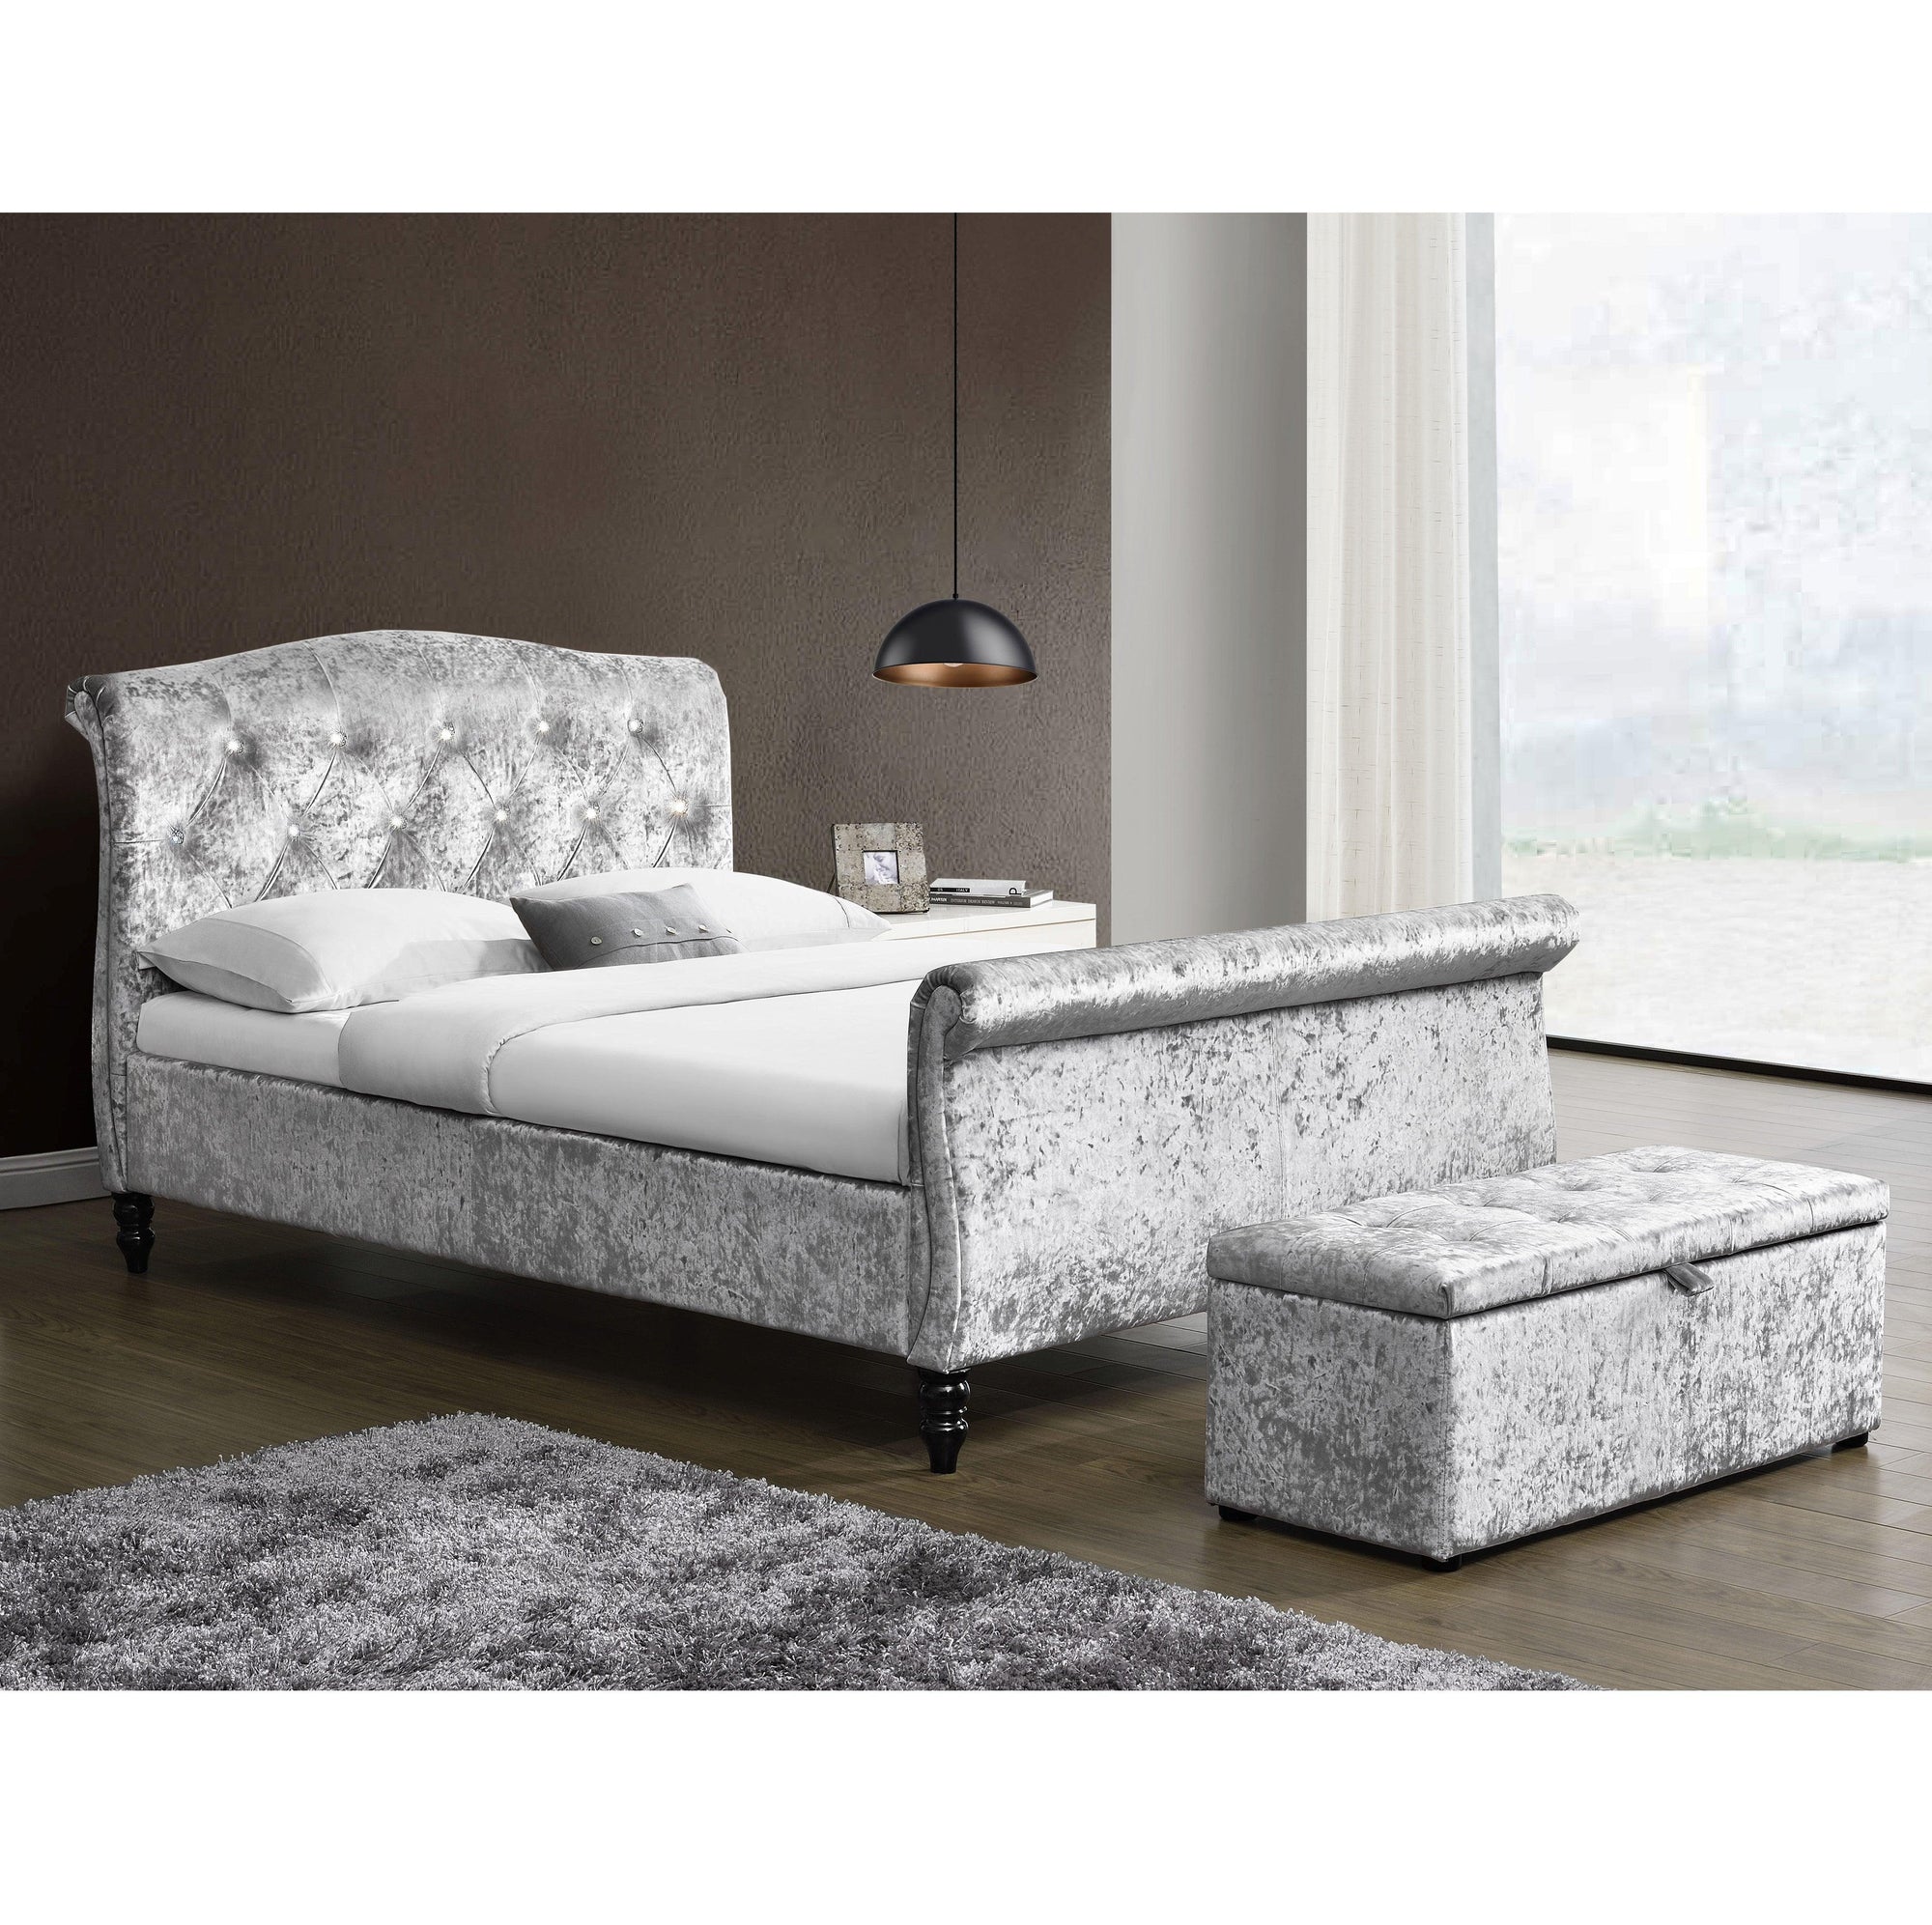 MEISSA Crushed Velvet Upholstered Sleigh Bed with Diamante Headboard, Silver